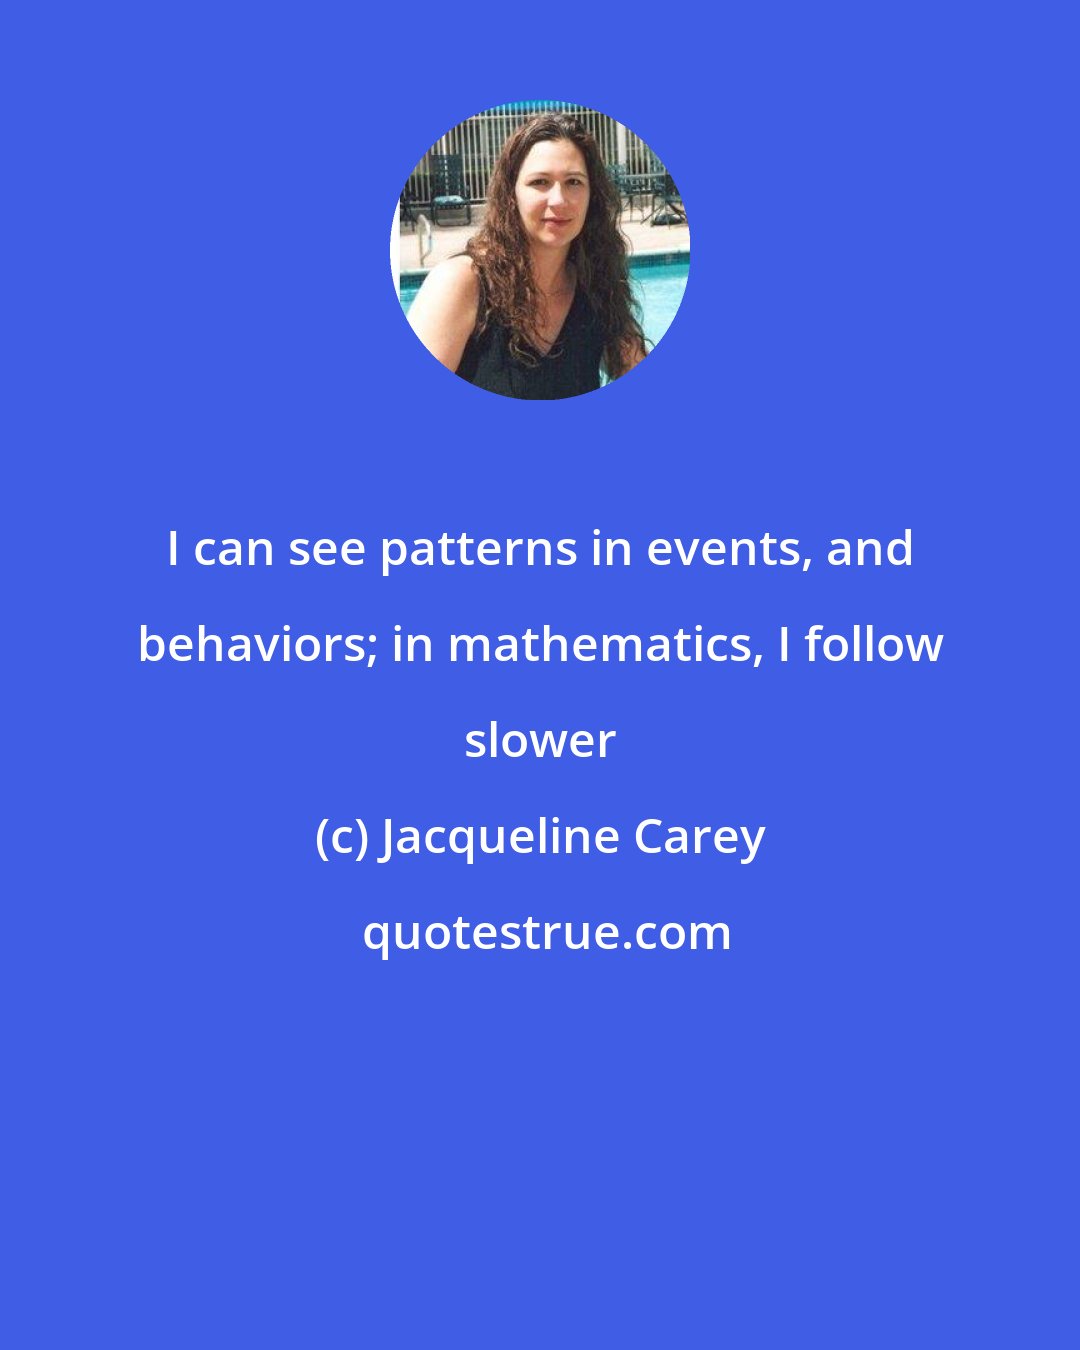 Jacqueline Carey: I can see patterns in events, and behaviors; in mathematics, I follow slower